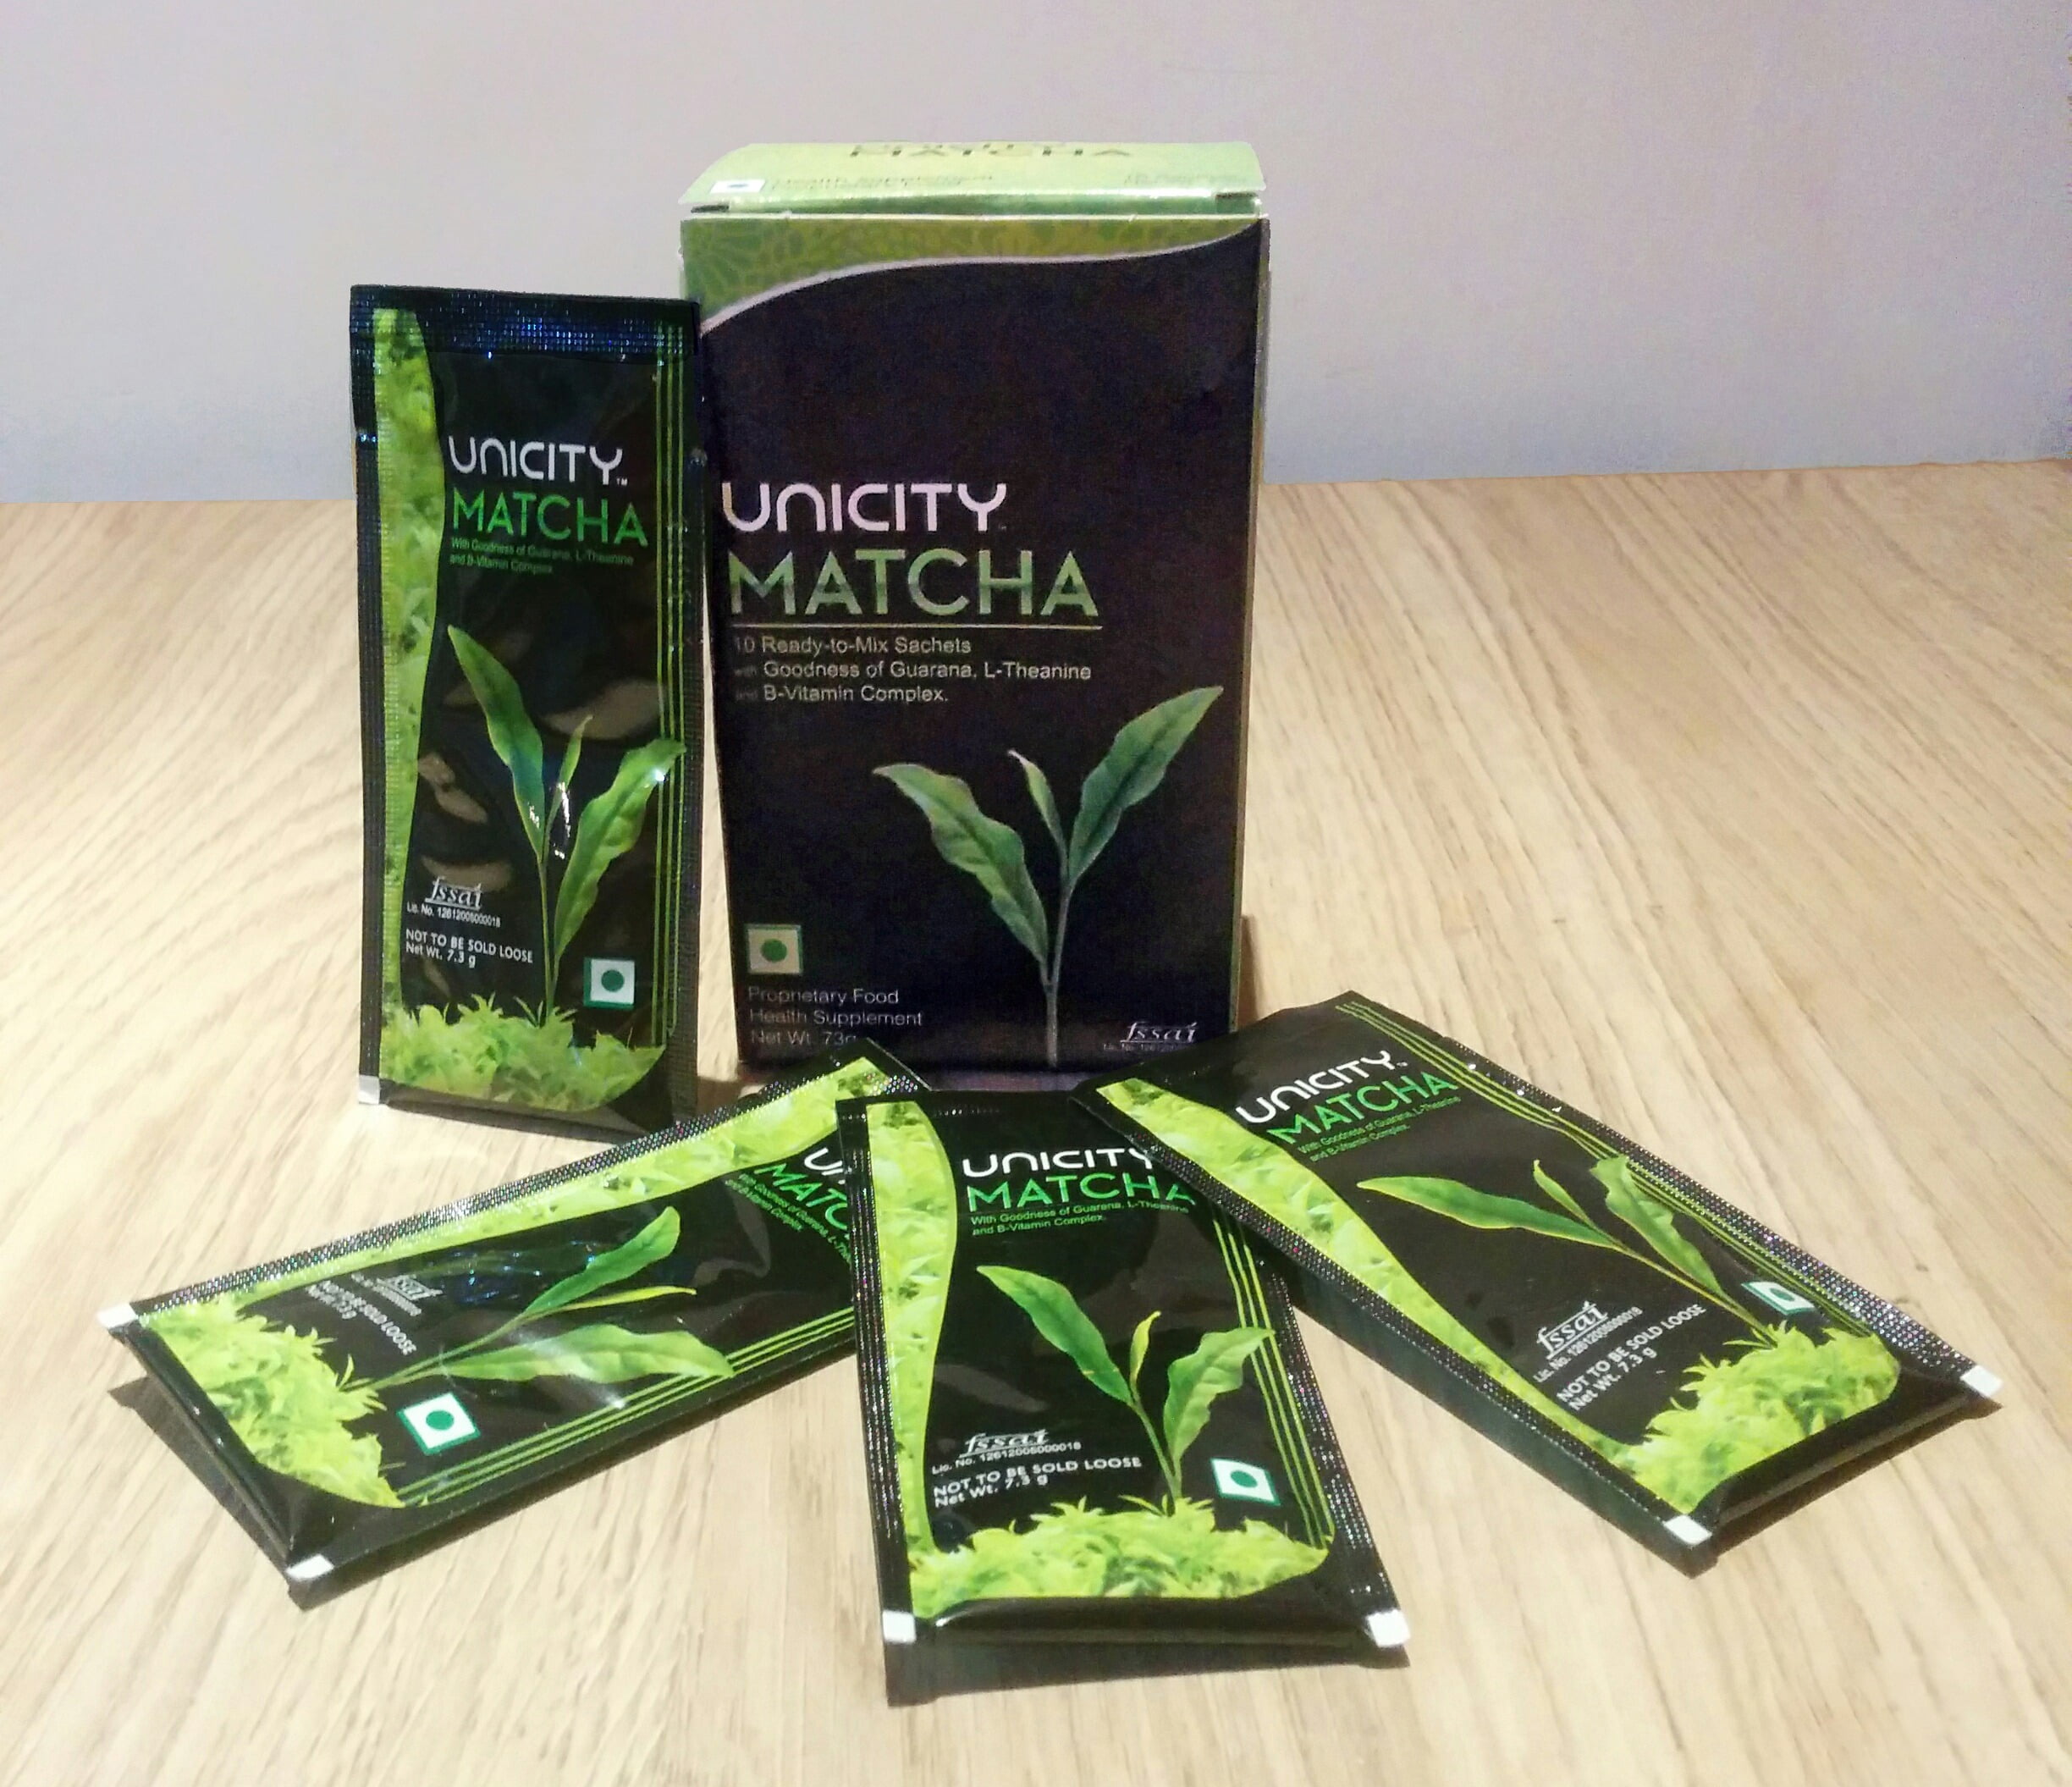 UNICITY MATCHA A Magical Health Drink For Weight Loss